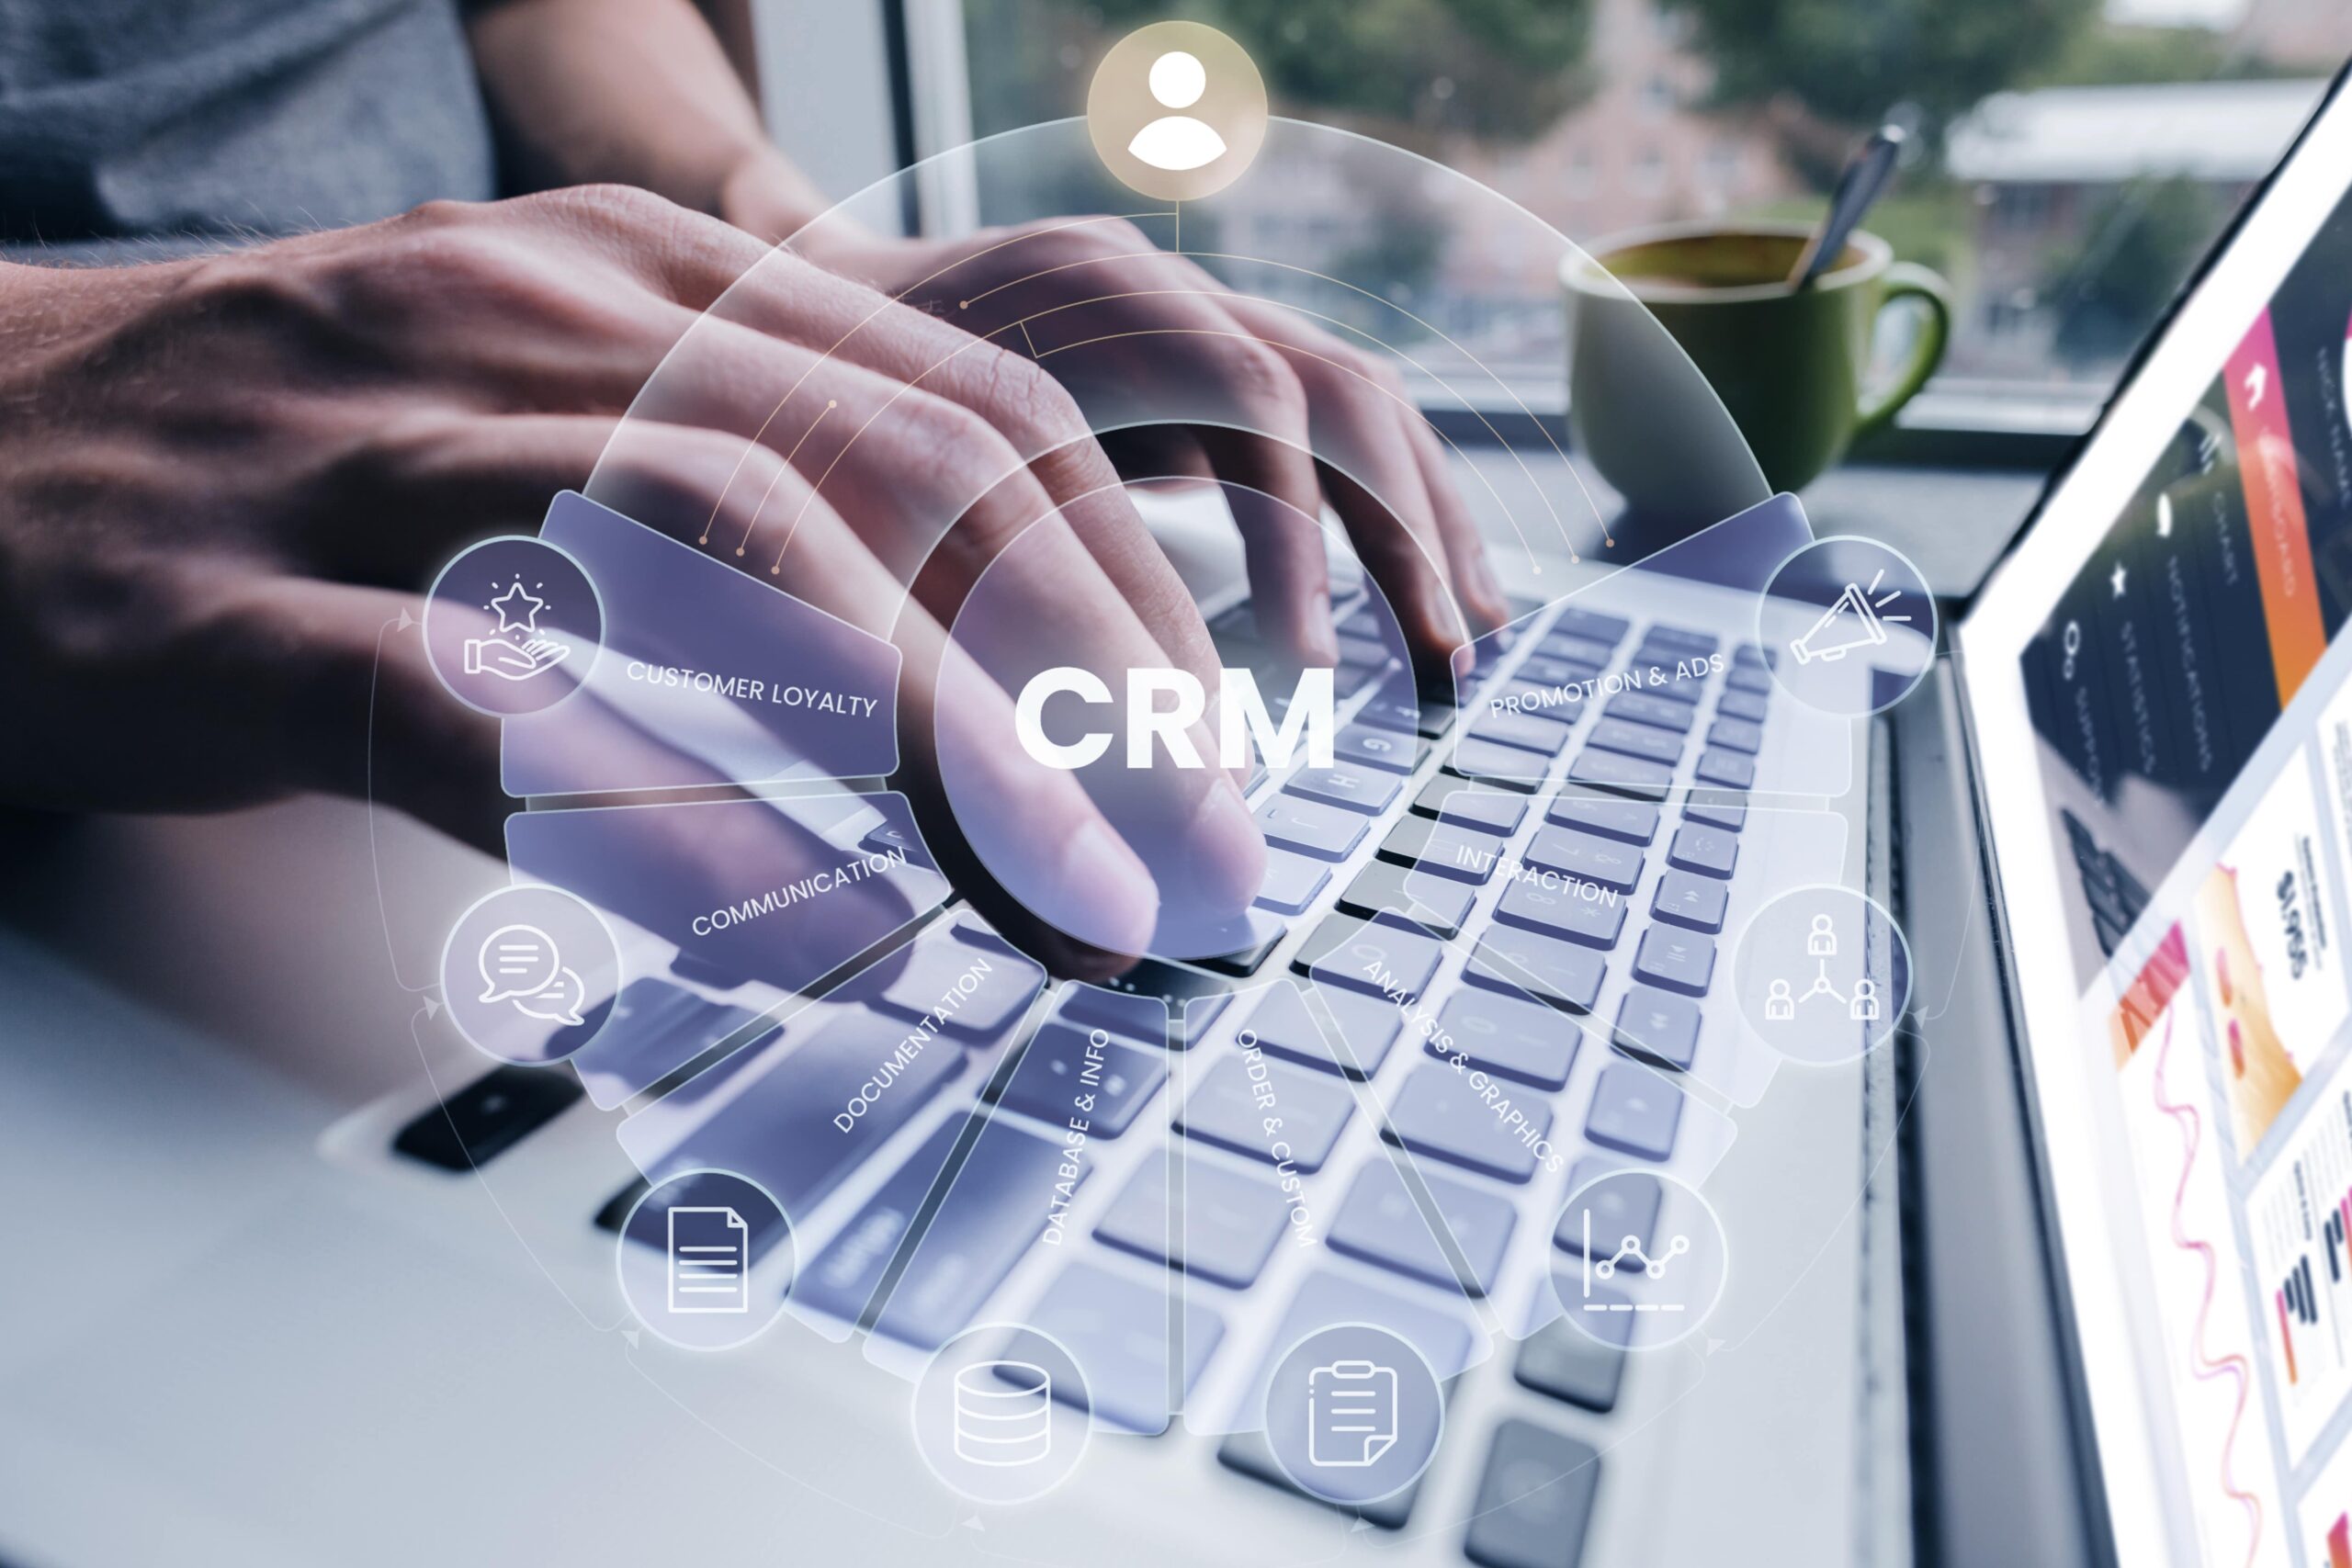 Next-Level CRM: Tools of the Trade for CRM Development Companies